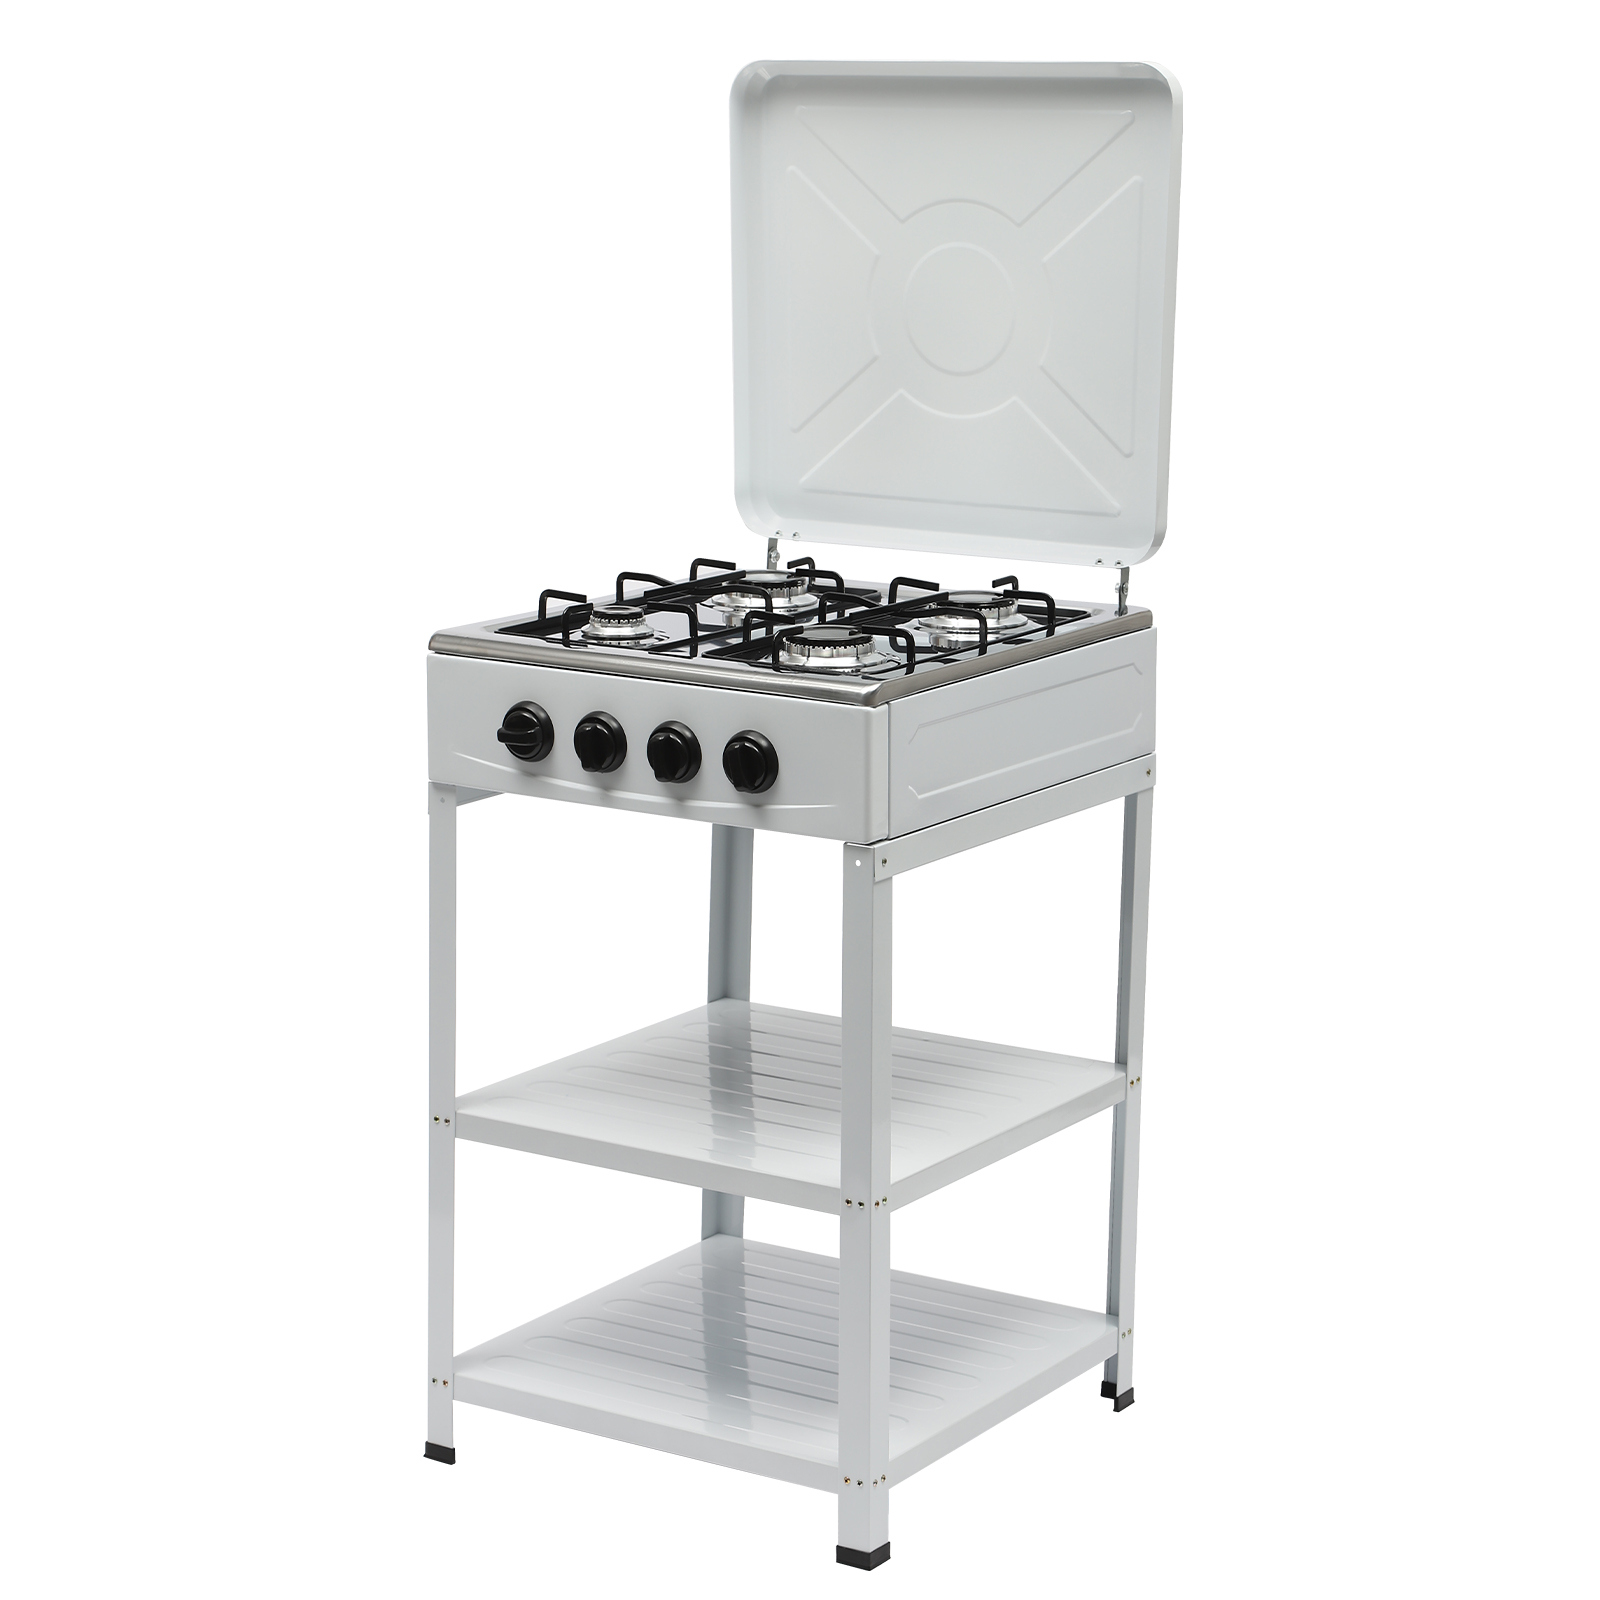 Oukaning 4 Burner Gas Stove with Support Leg Stand and Wind Blocking Cover Camping Stove for RV, Home ,Outdoor Cooking (White) - image 1 of 13